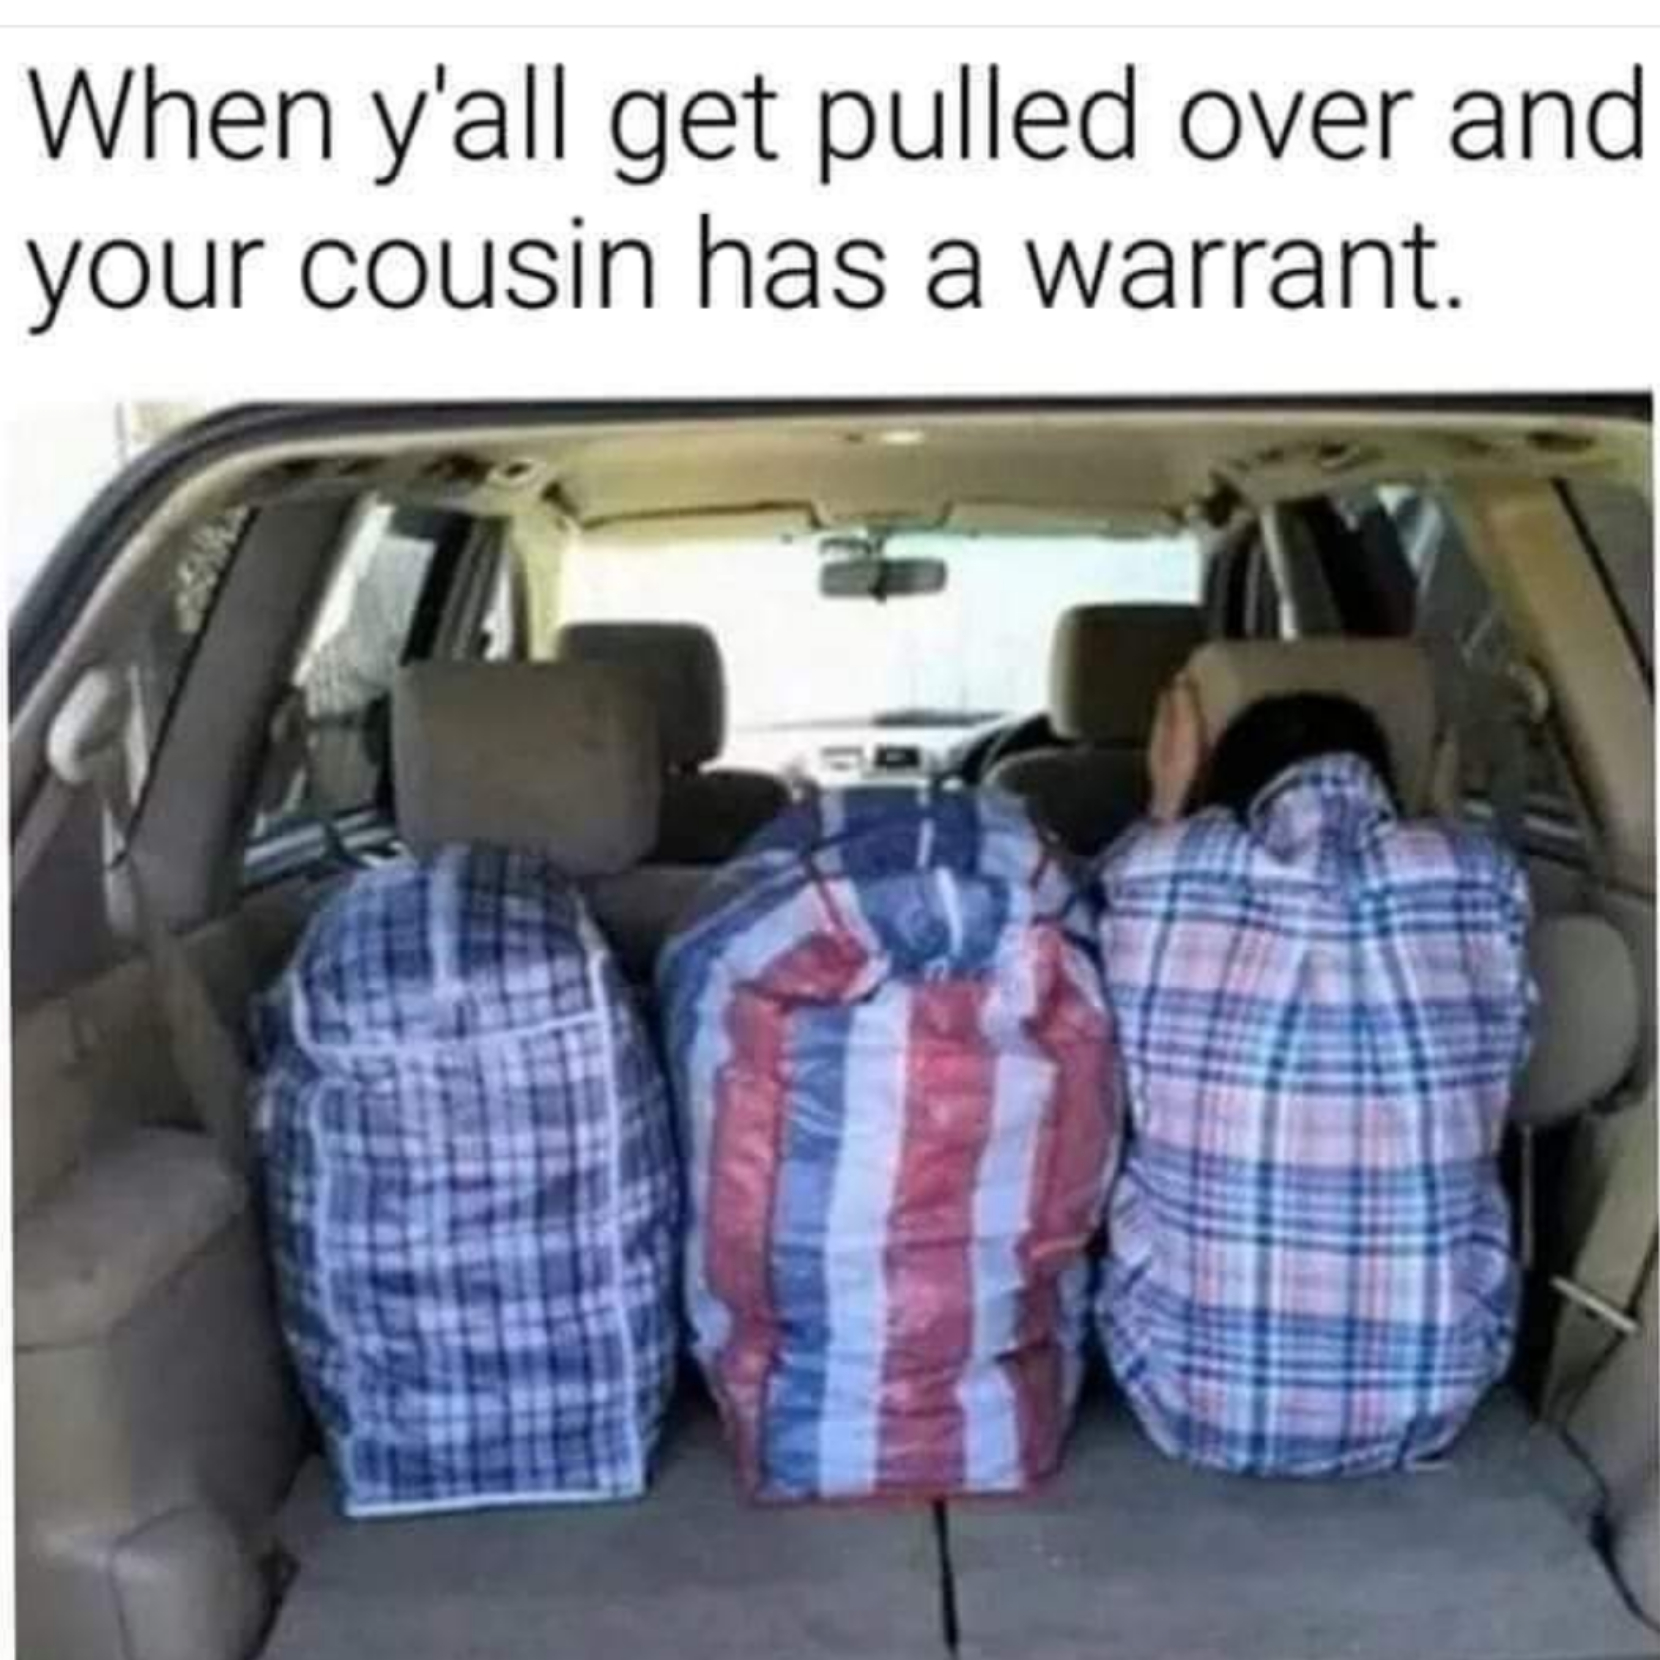 y all get pulled over and your cousin has a warrant - When y'all get pulled over and your cousin has a warrant.